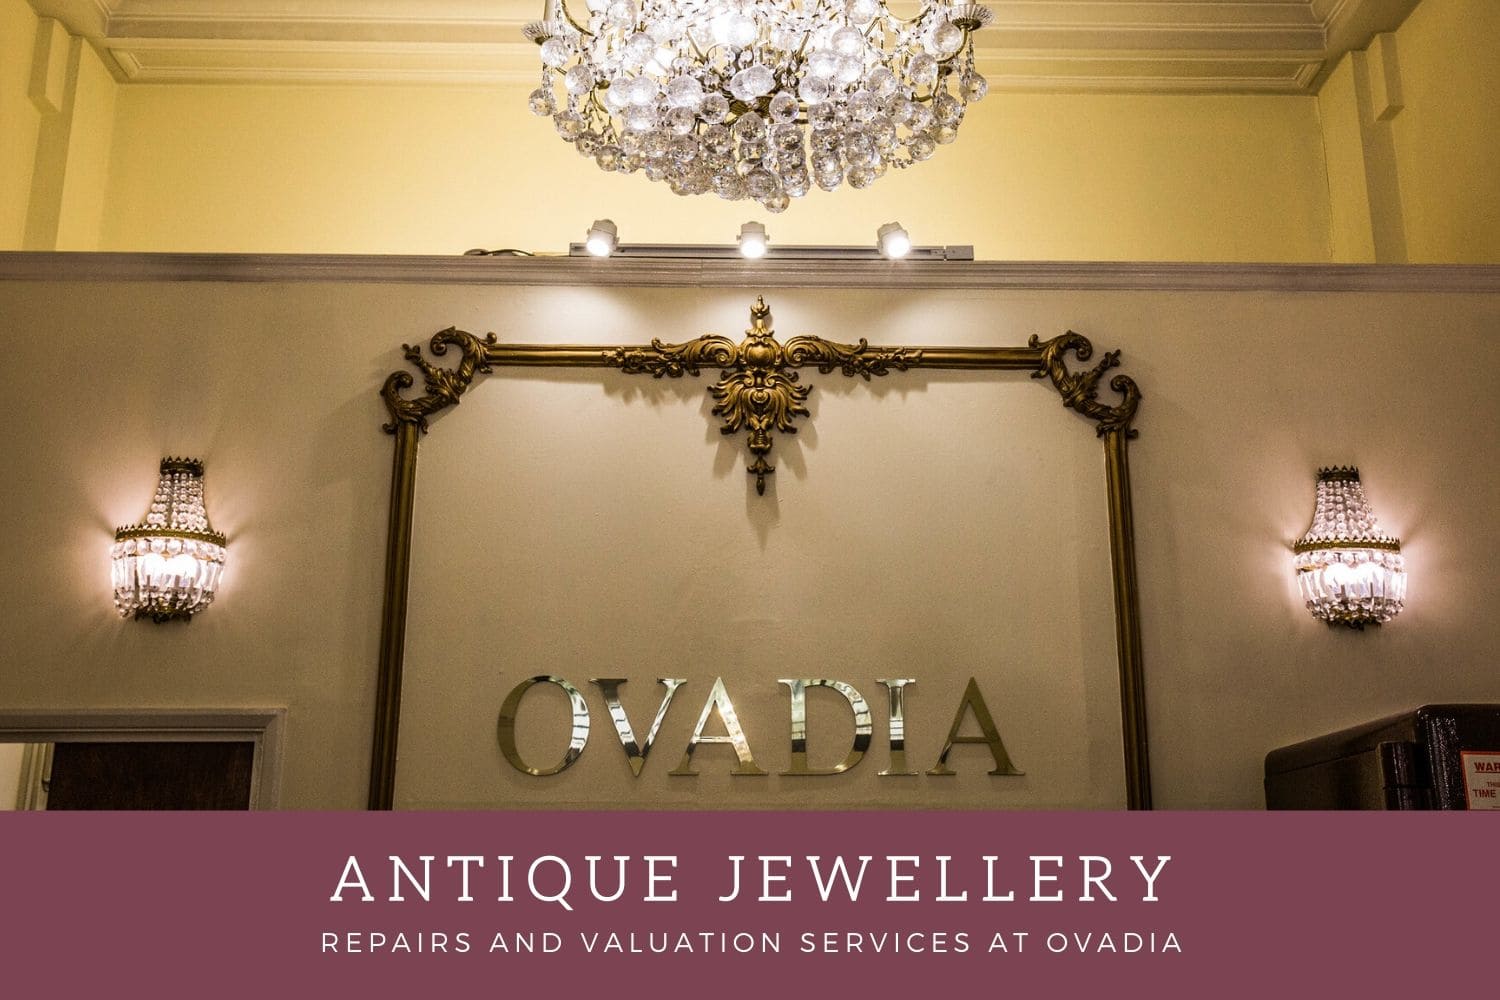 Antique Jewellery London Repairs And Valuation Services